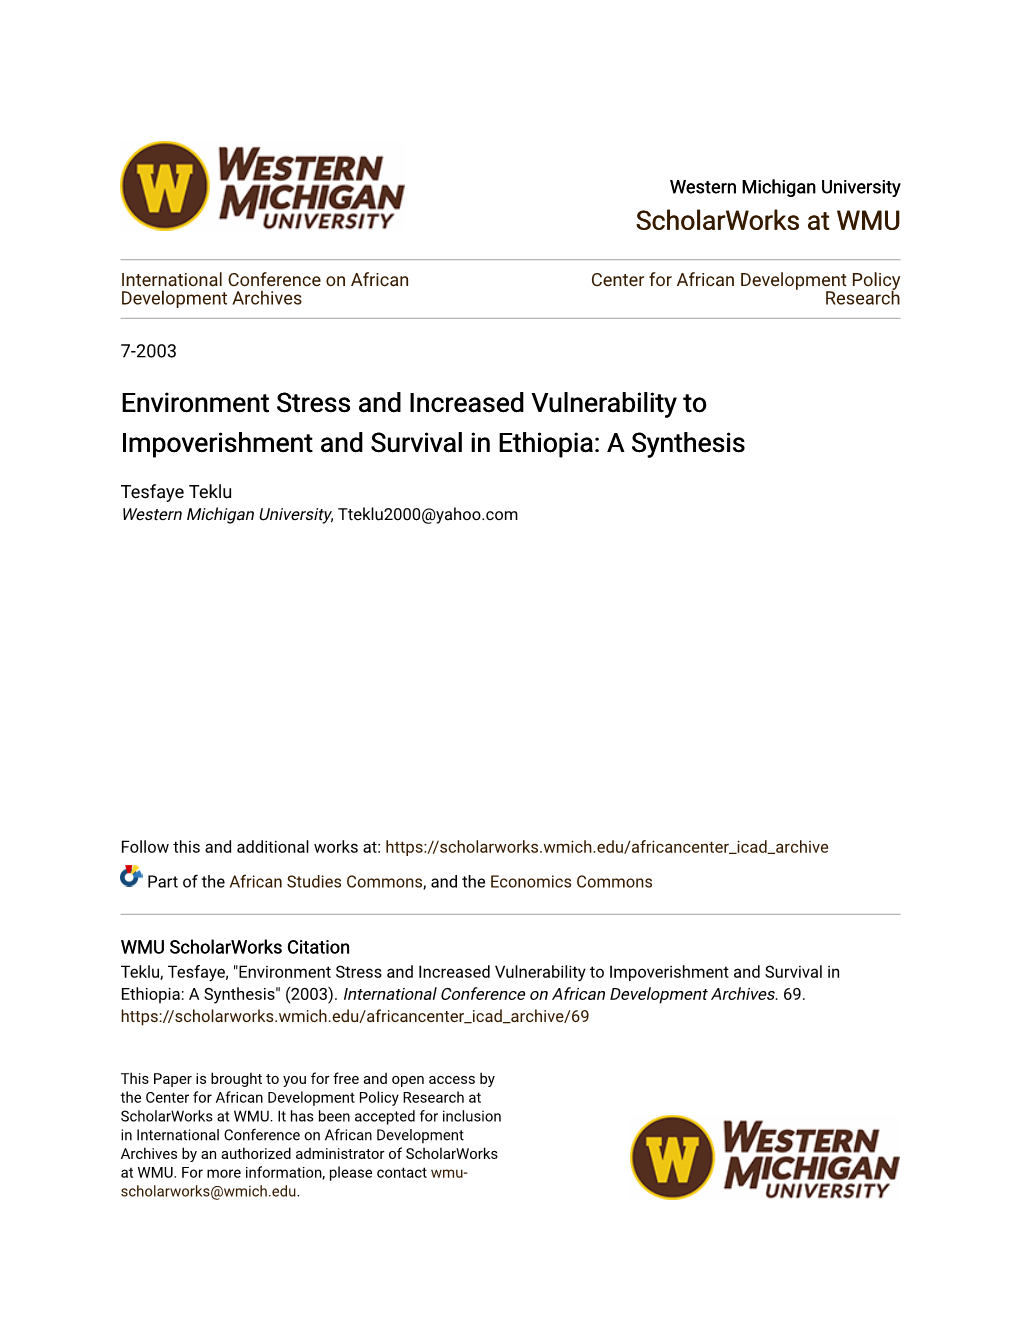 Environment Stress and Increased Vulnerability to Impoverishment and Survival in Ethiopia: a Synthesis